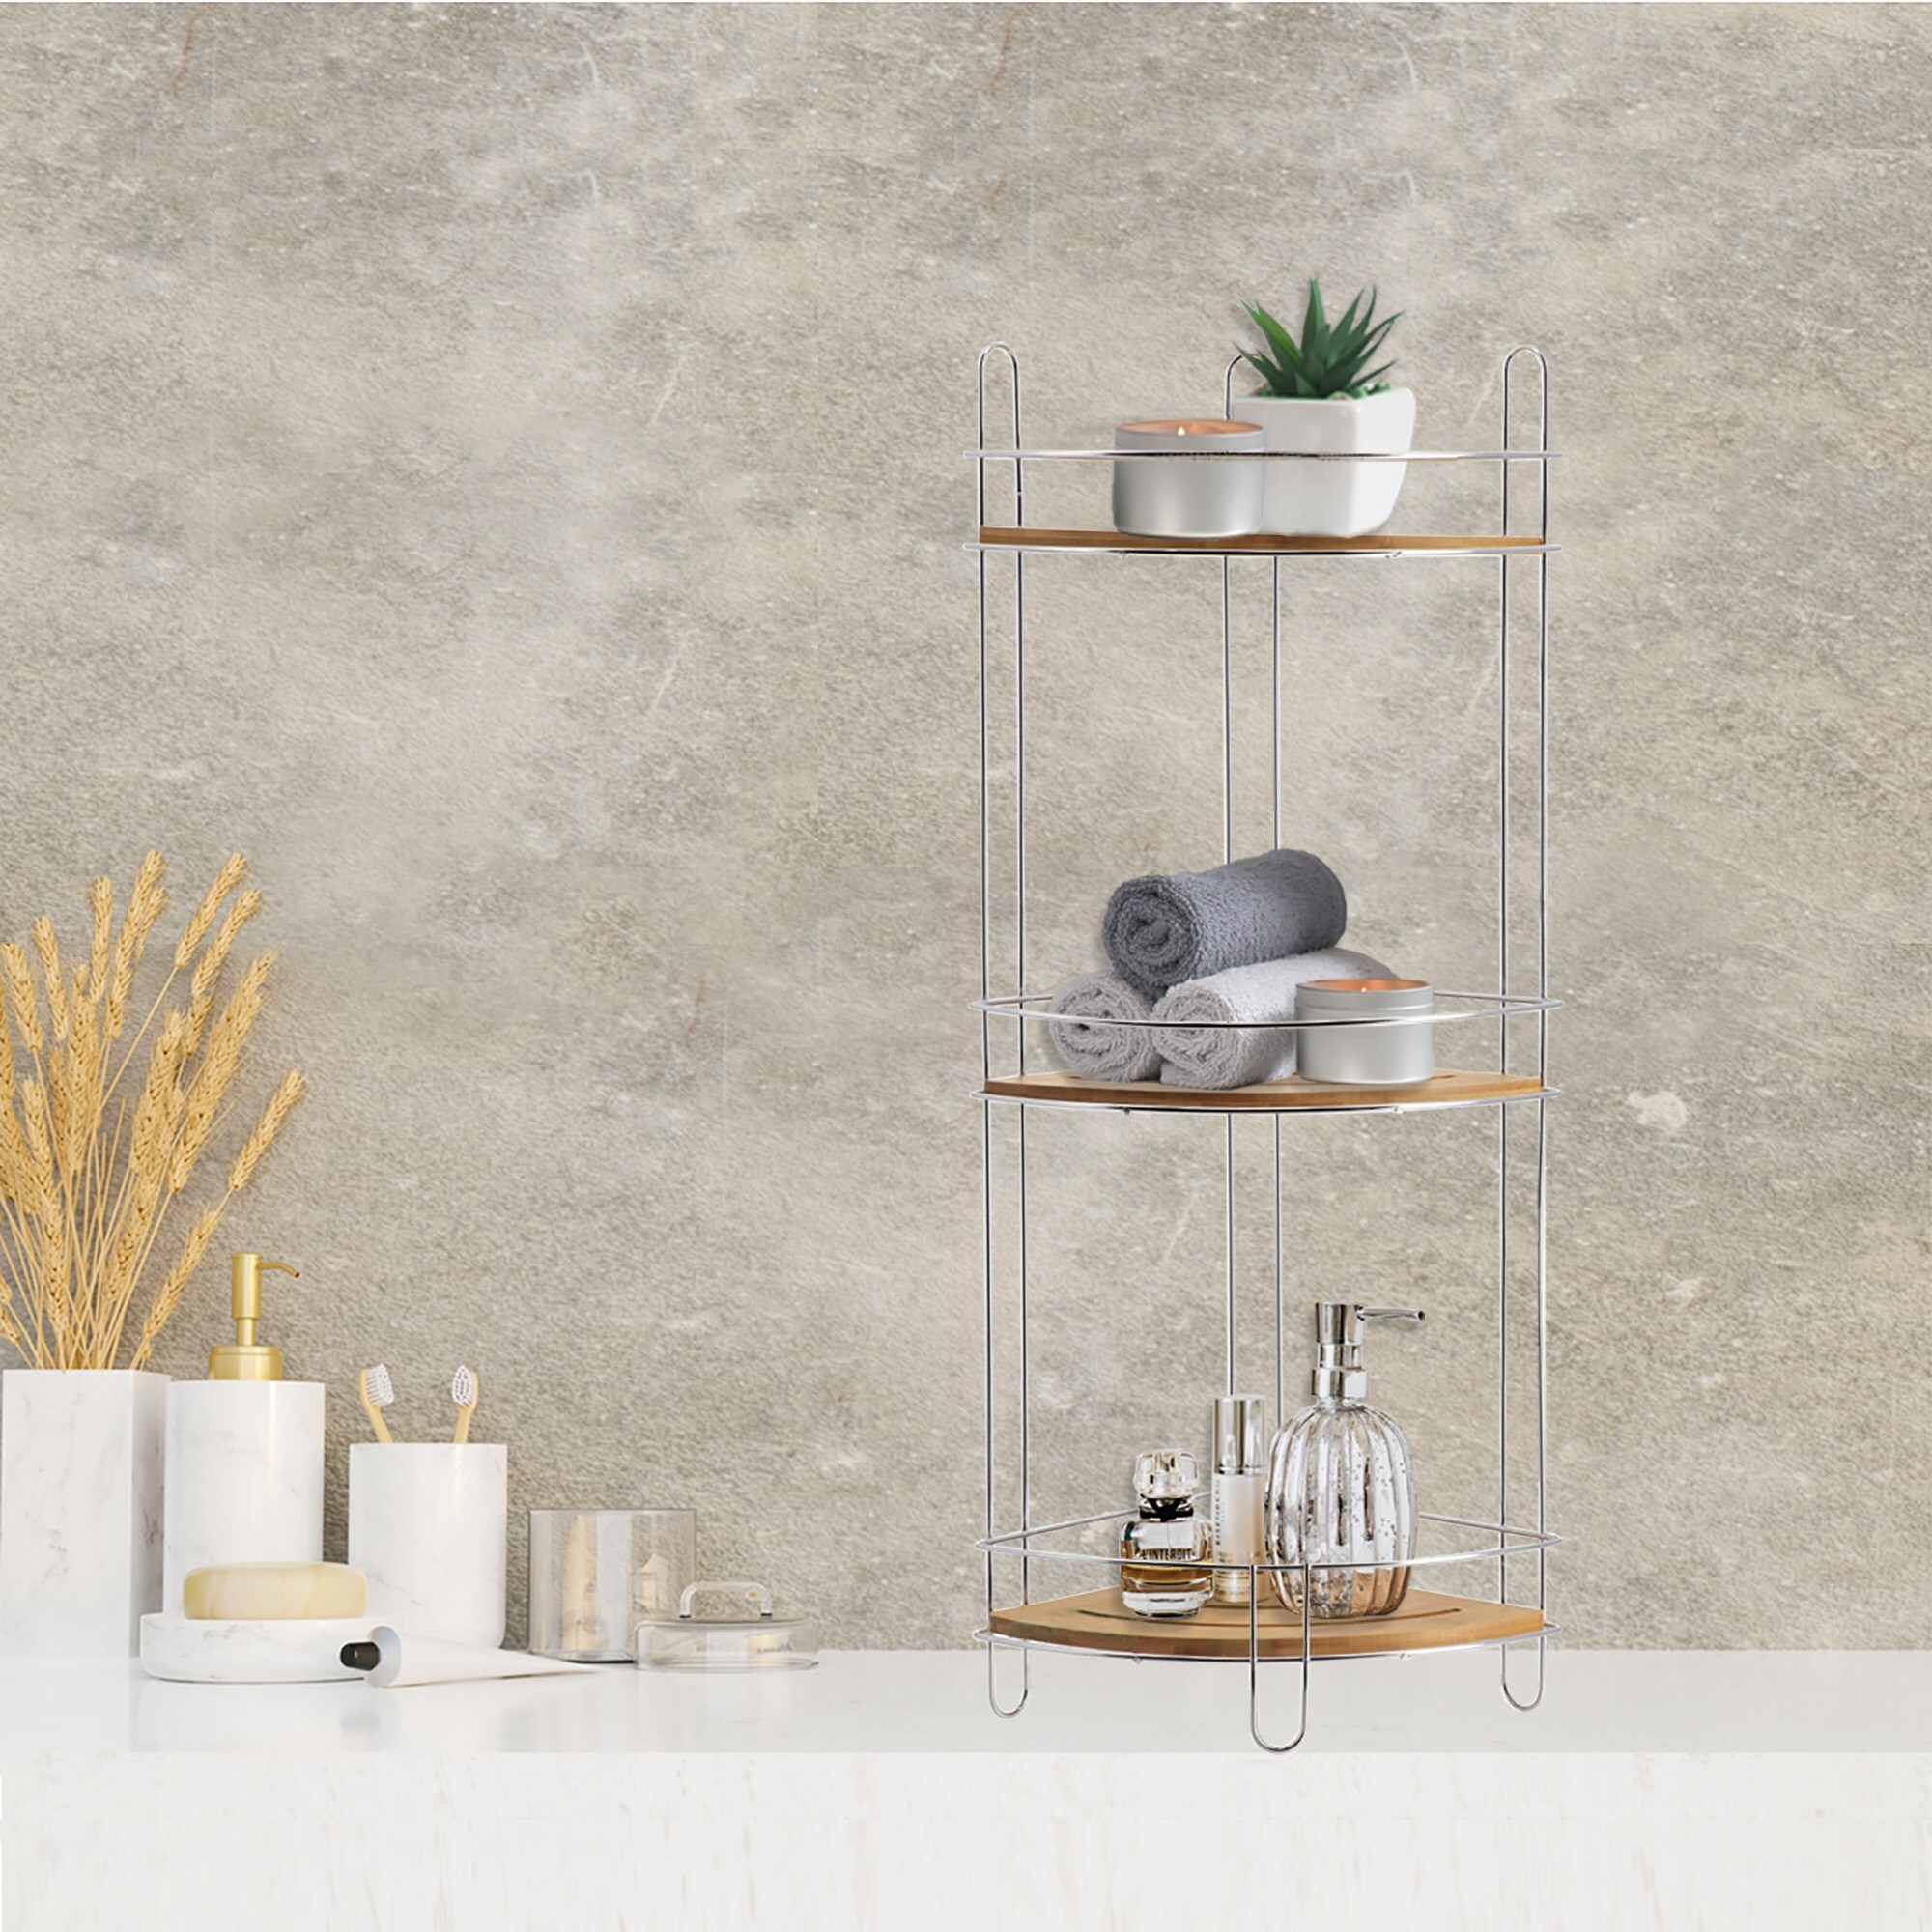 https://ak1.ostkcdn.com/images/products/is/images/direct/4aa92a9296ff7316576ebdb5fd9f176c93bf6c47/Organizer-Metal-Wire-Corner-Shower-Caddy-Bamboo.jpg